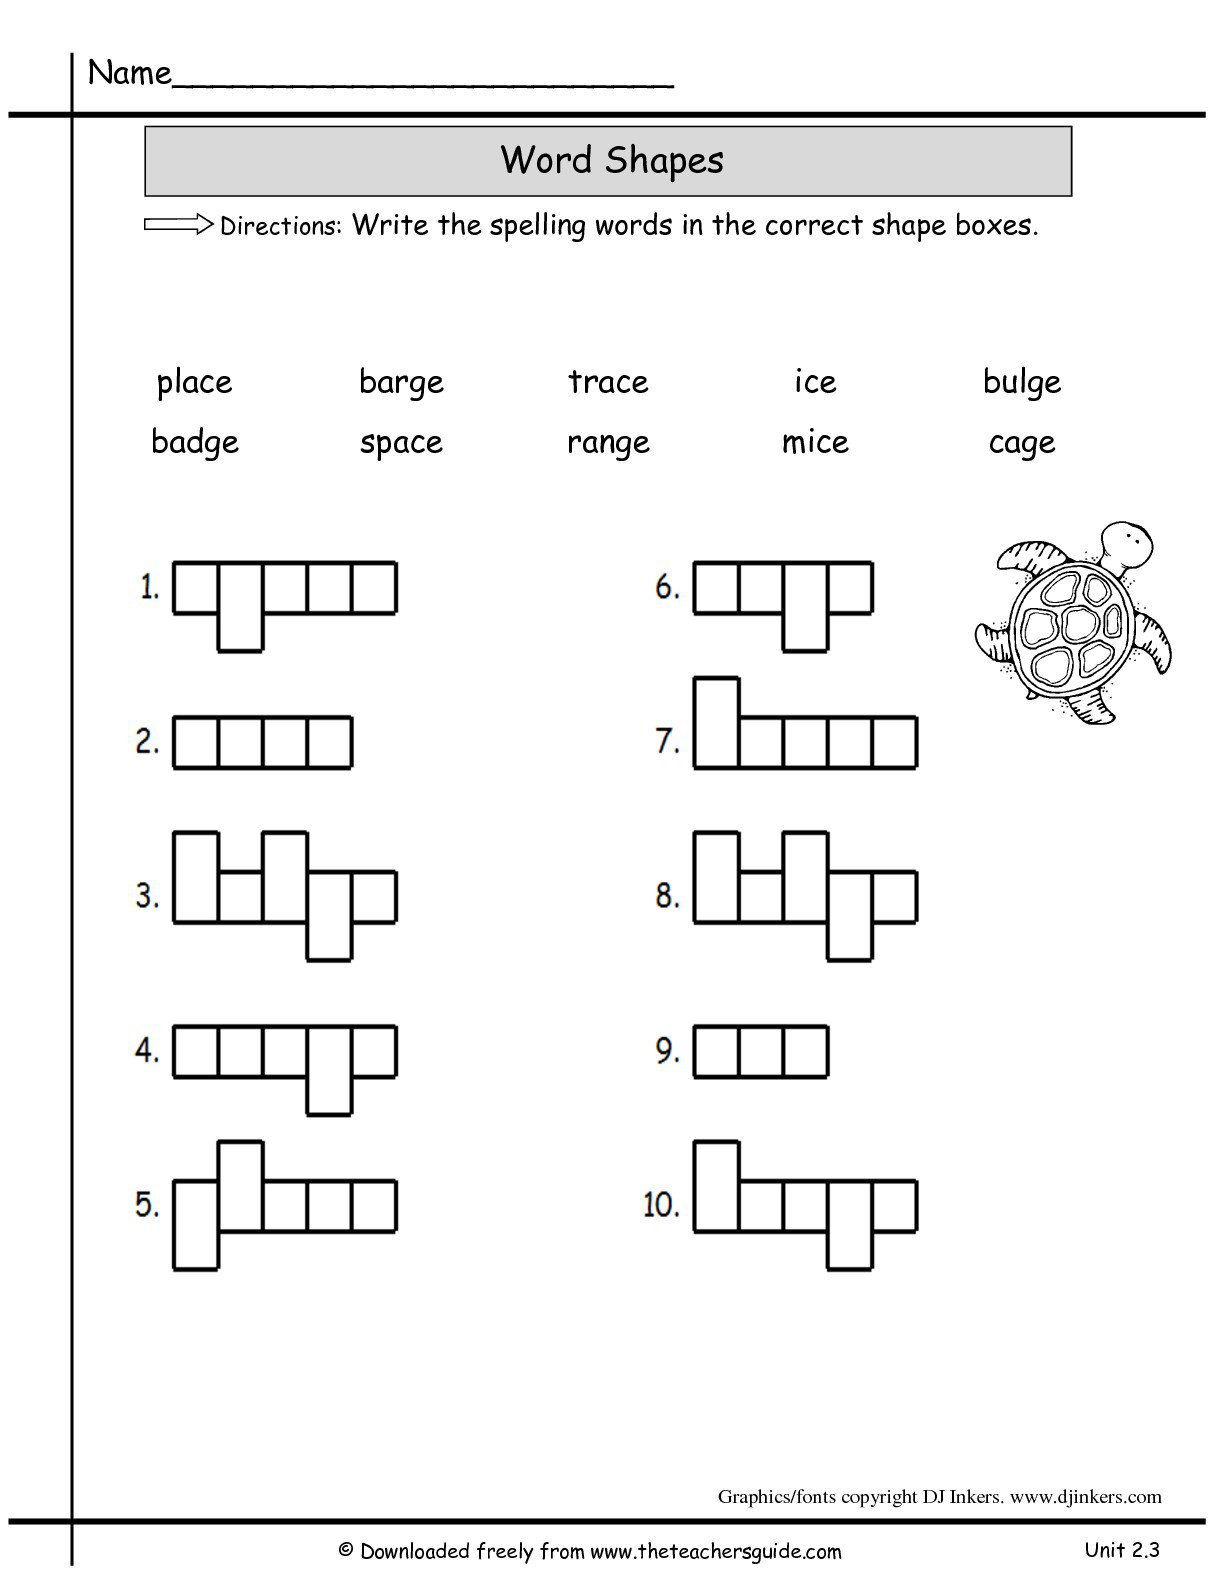 Second Graders Worksheets The Best Worksheets Image Collection